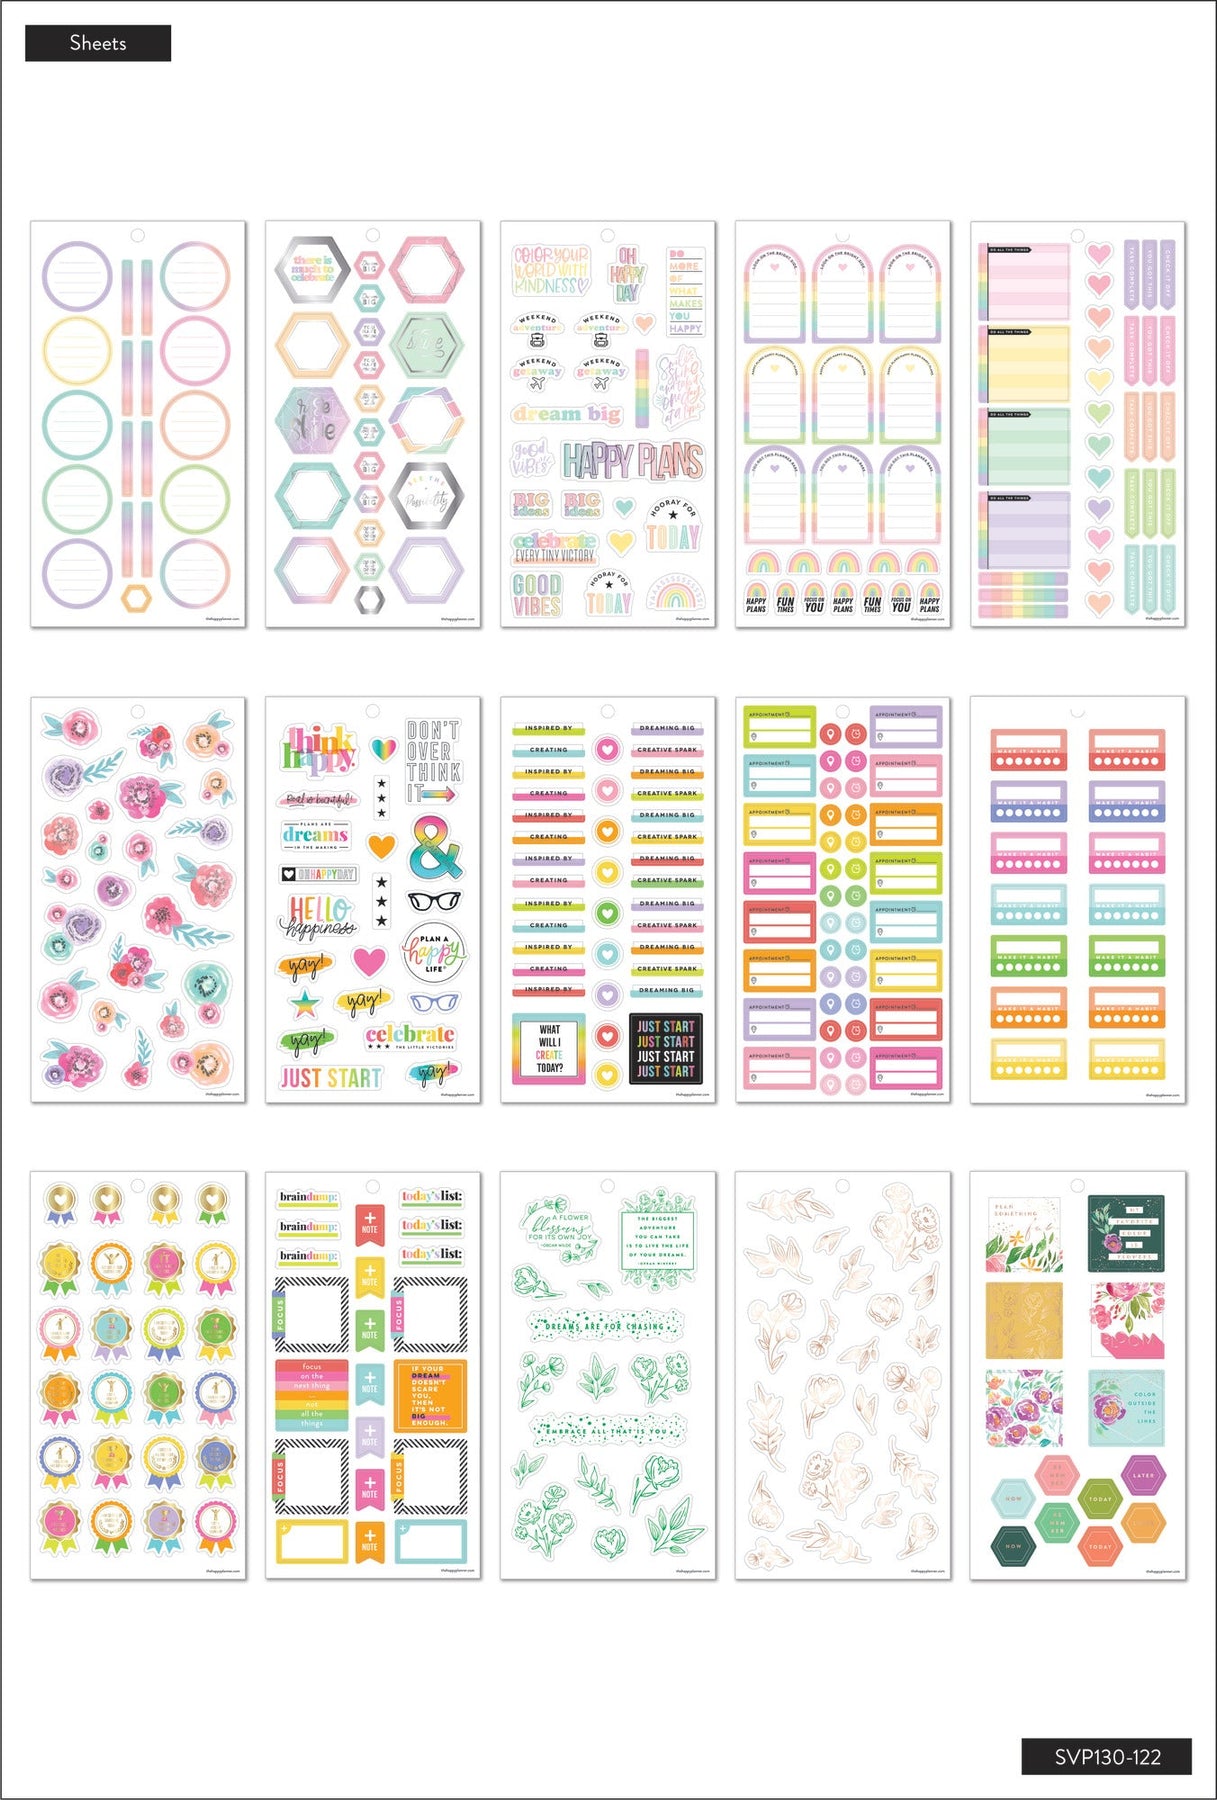 Happy Planner Sticker Value Pack - Choose Happy - Mini, 749-pack - 8786843